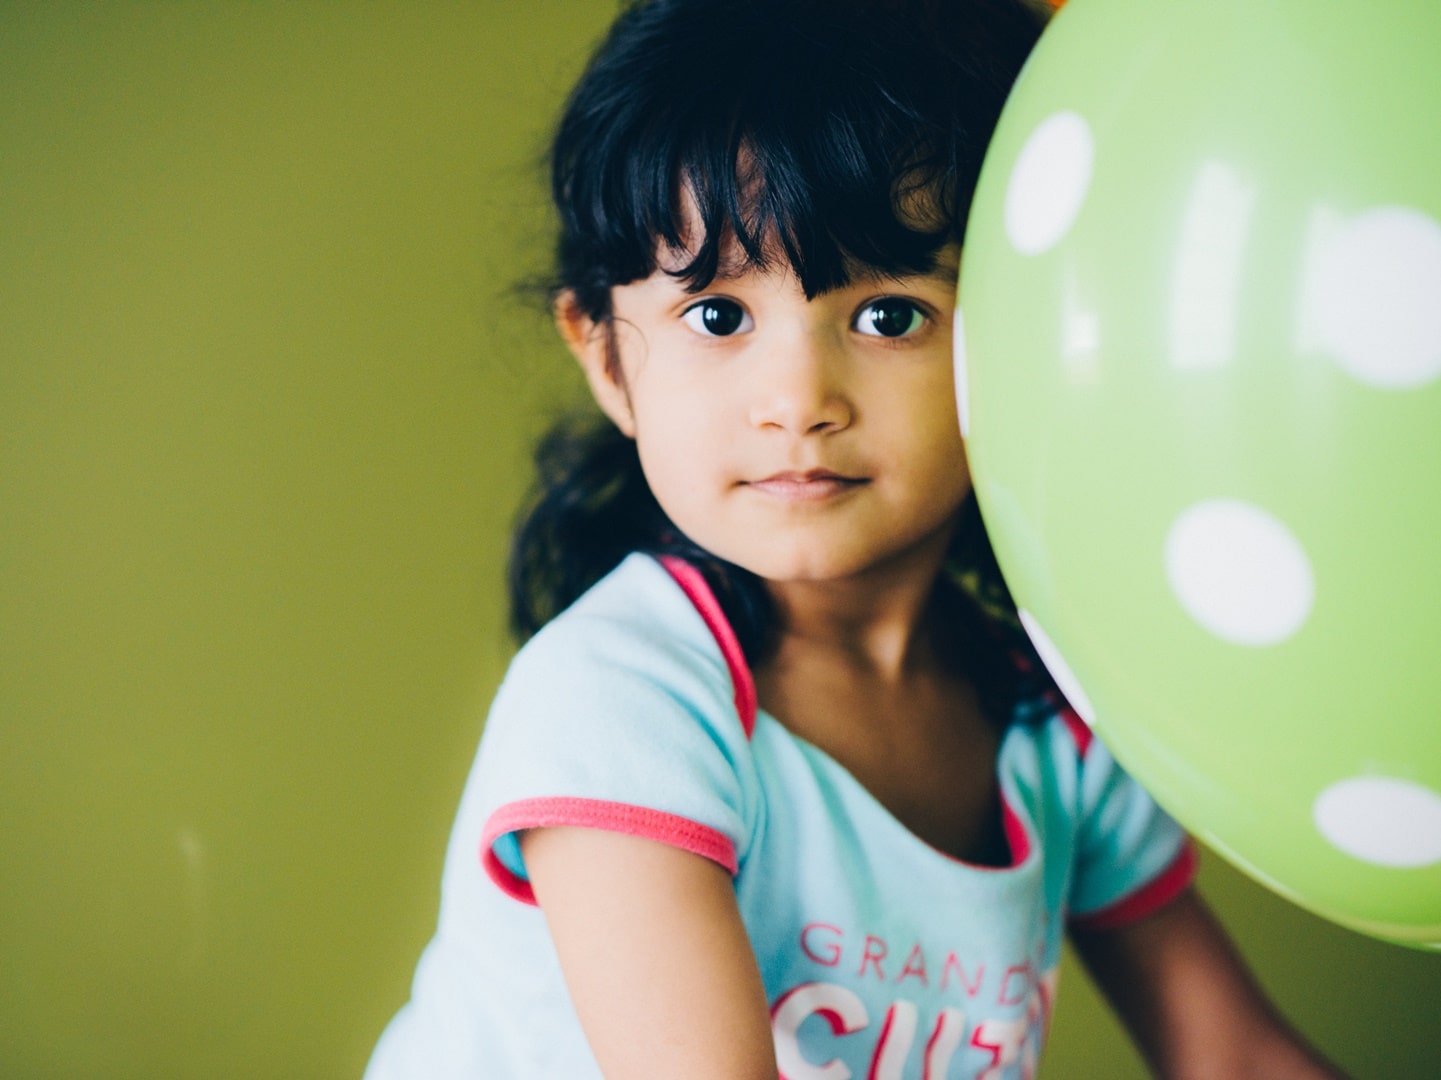 little girl with dark hair and brown eyes standing next to a green balloon